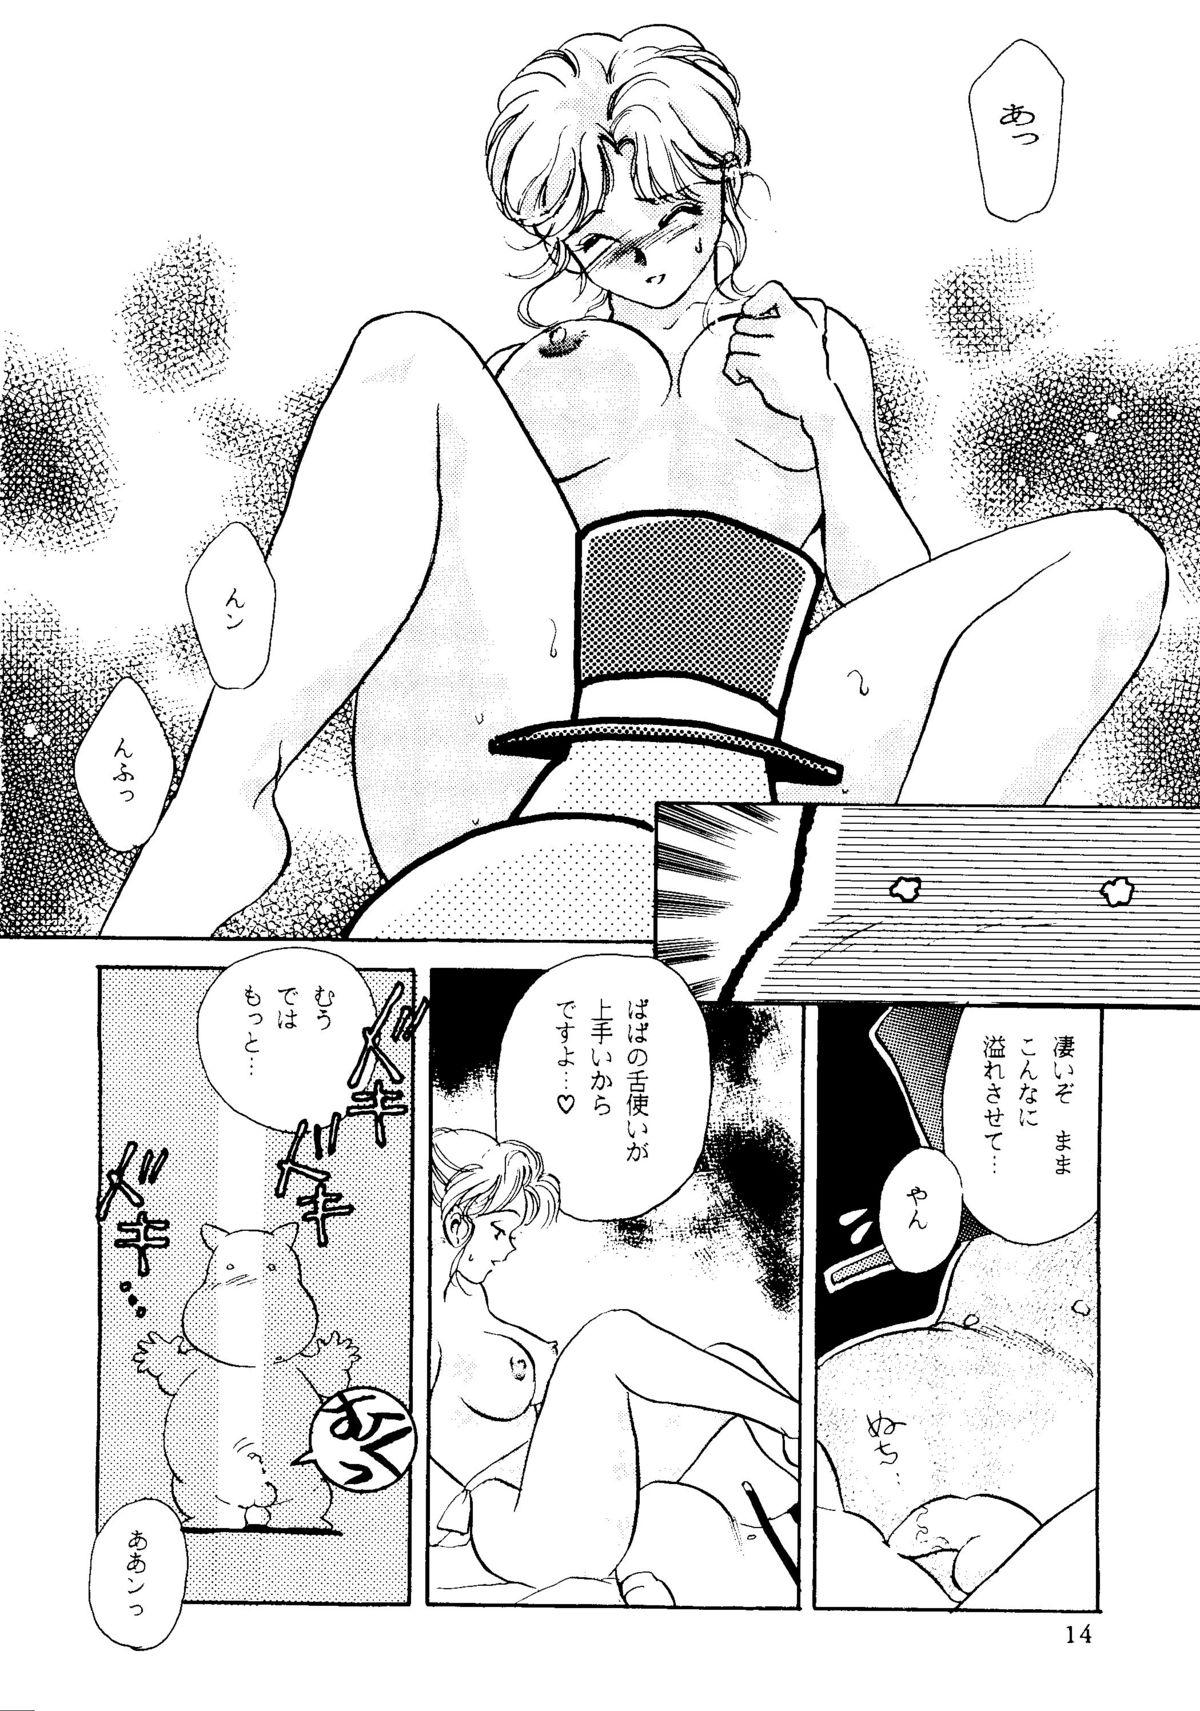 Solo Female R KIDS! Vol. 8 - Sailor moon Street fighter Tenchi muyo Red baron And - Page 10